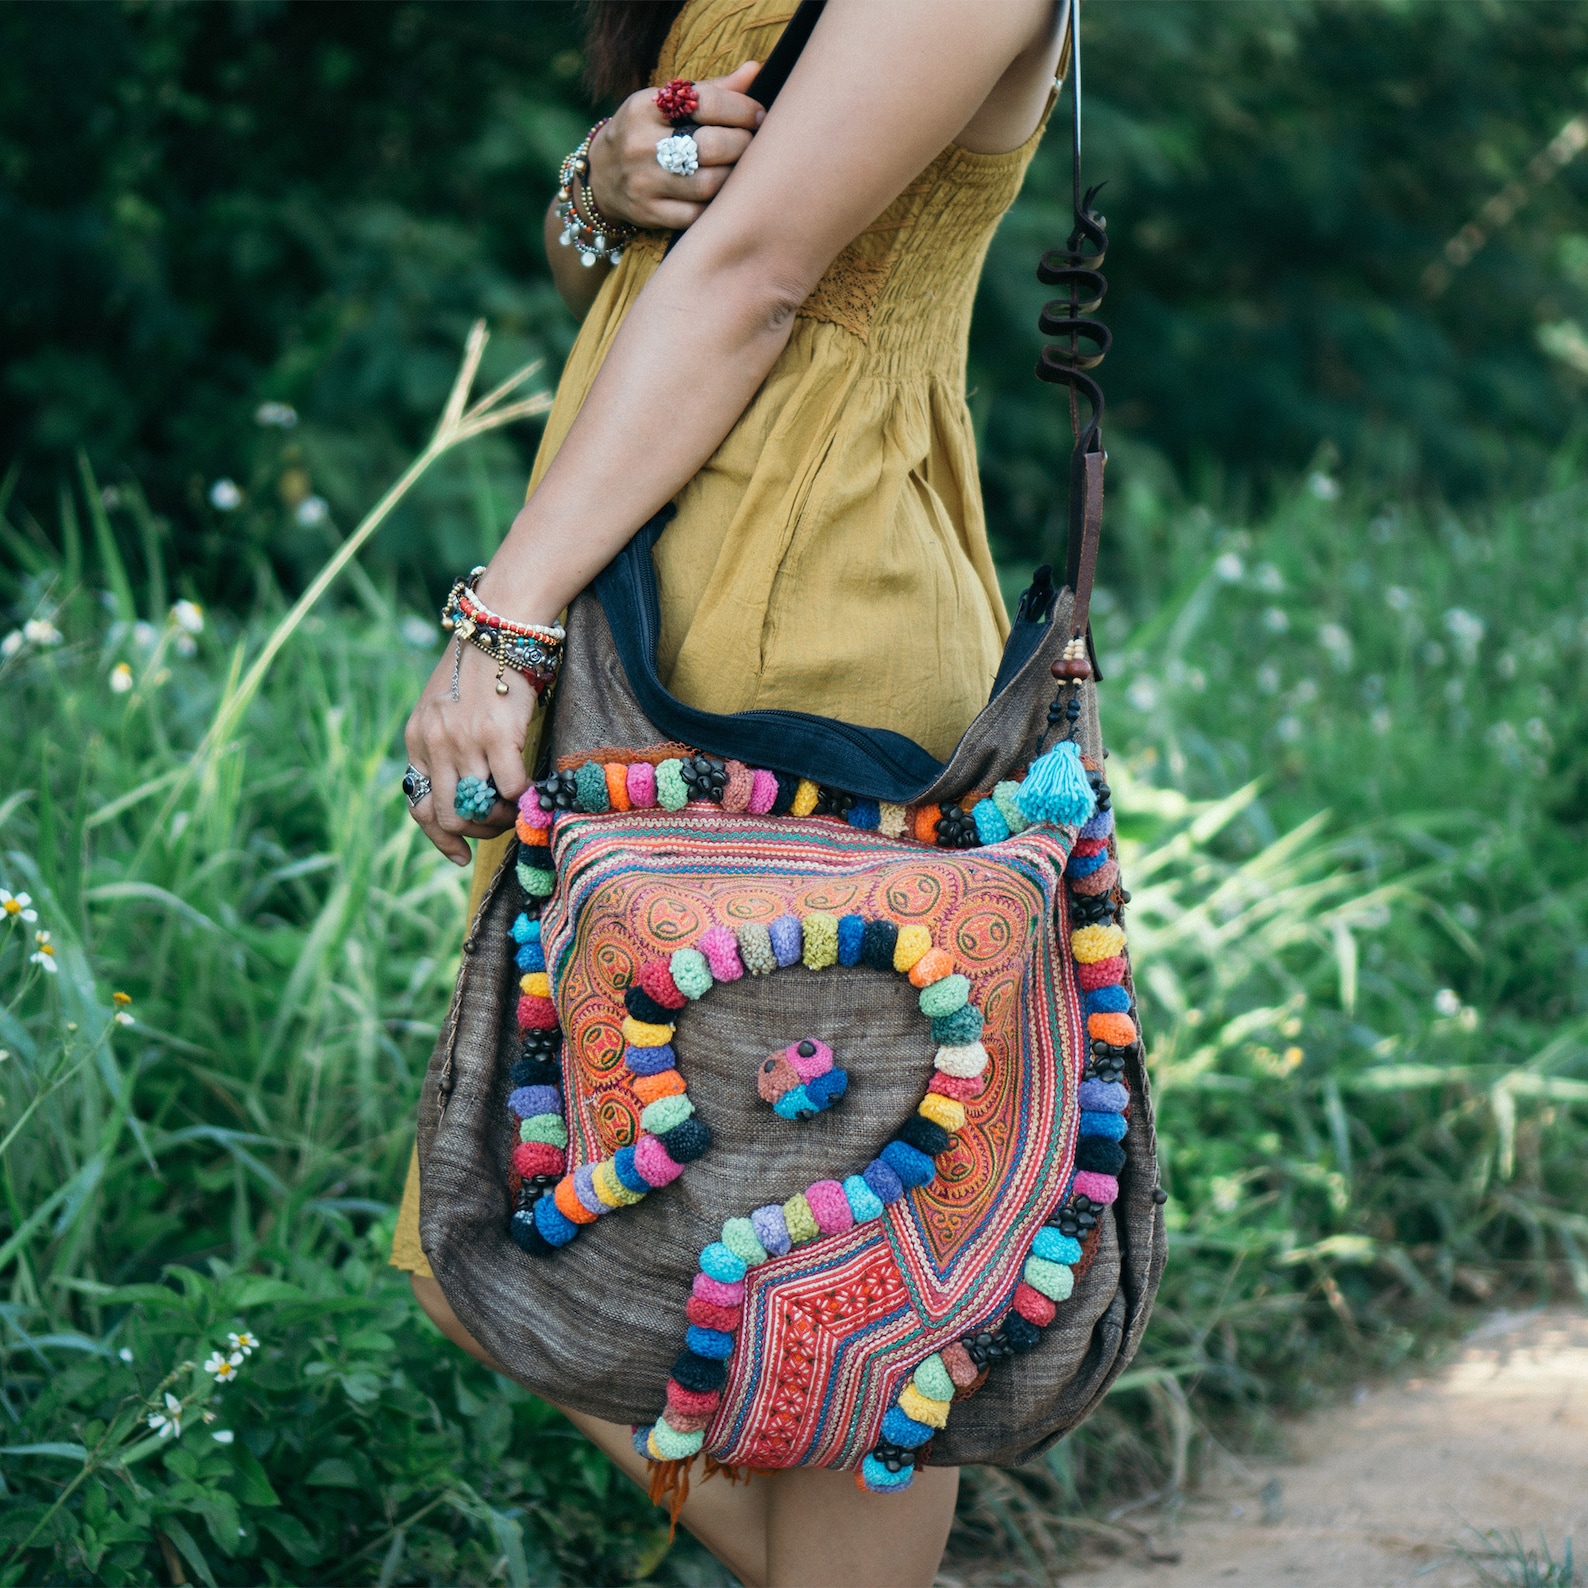 Handcrafted Pom Pom Crossbody Bag for Women With Vintage Hmong - Etsy